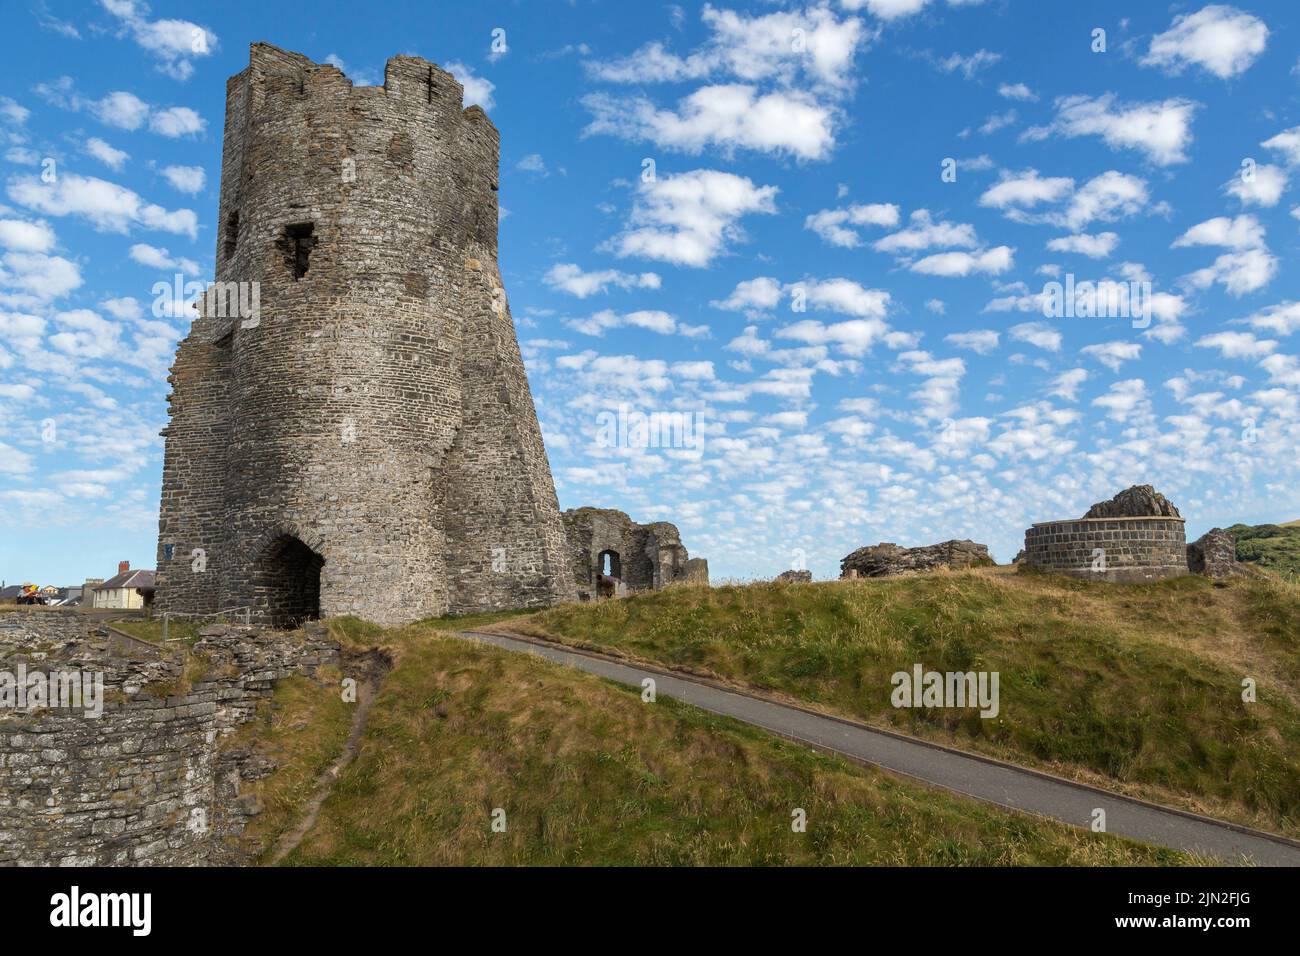 Remains of the north tower gateway at Aberystwyth Castle, a Grade I listed Edwardian fortress located in the seaside town of Aberystwyth, Wales. Stock Photo